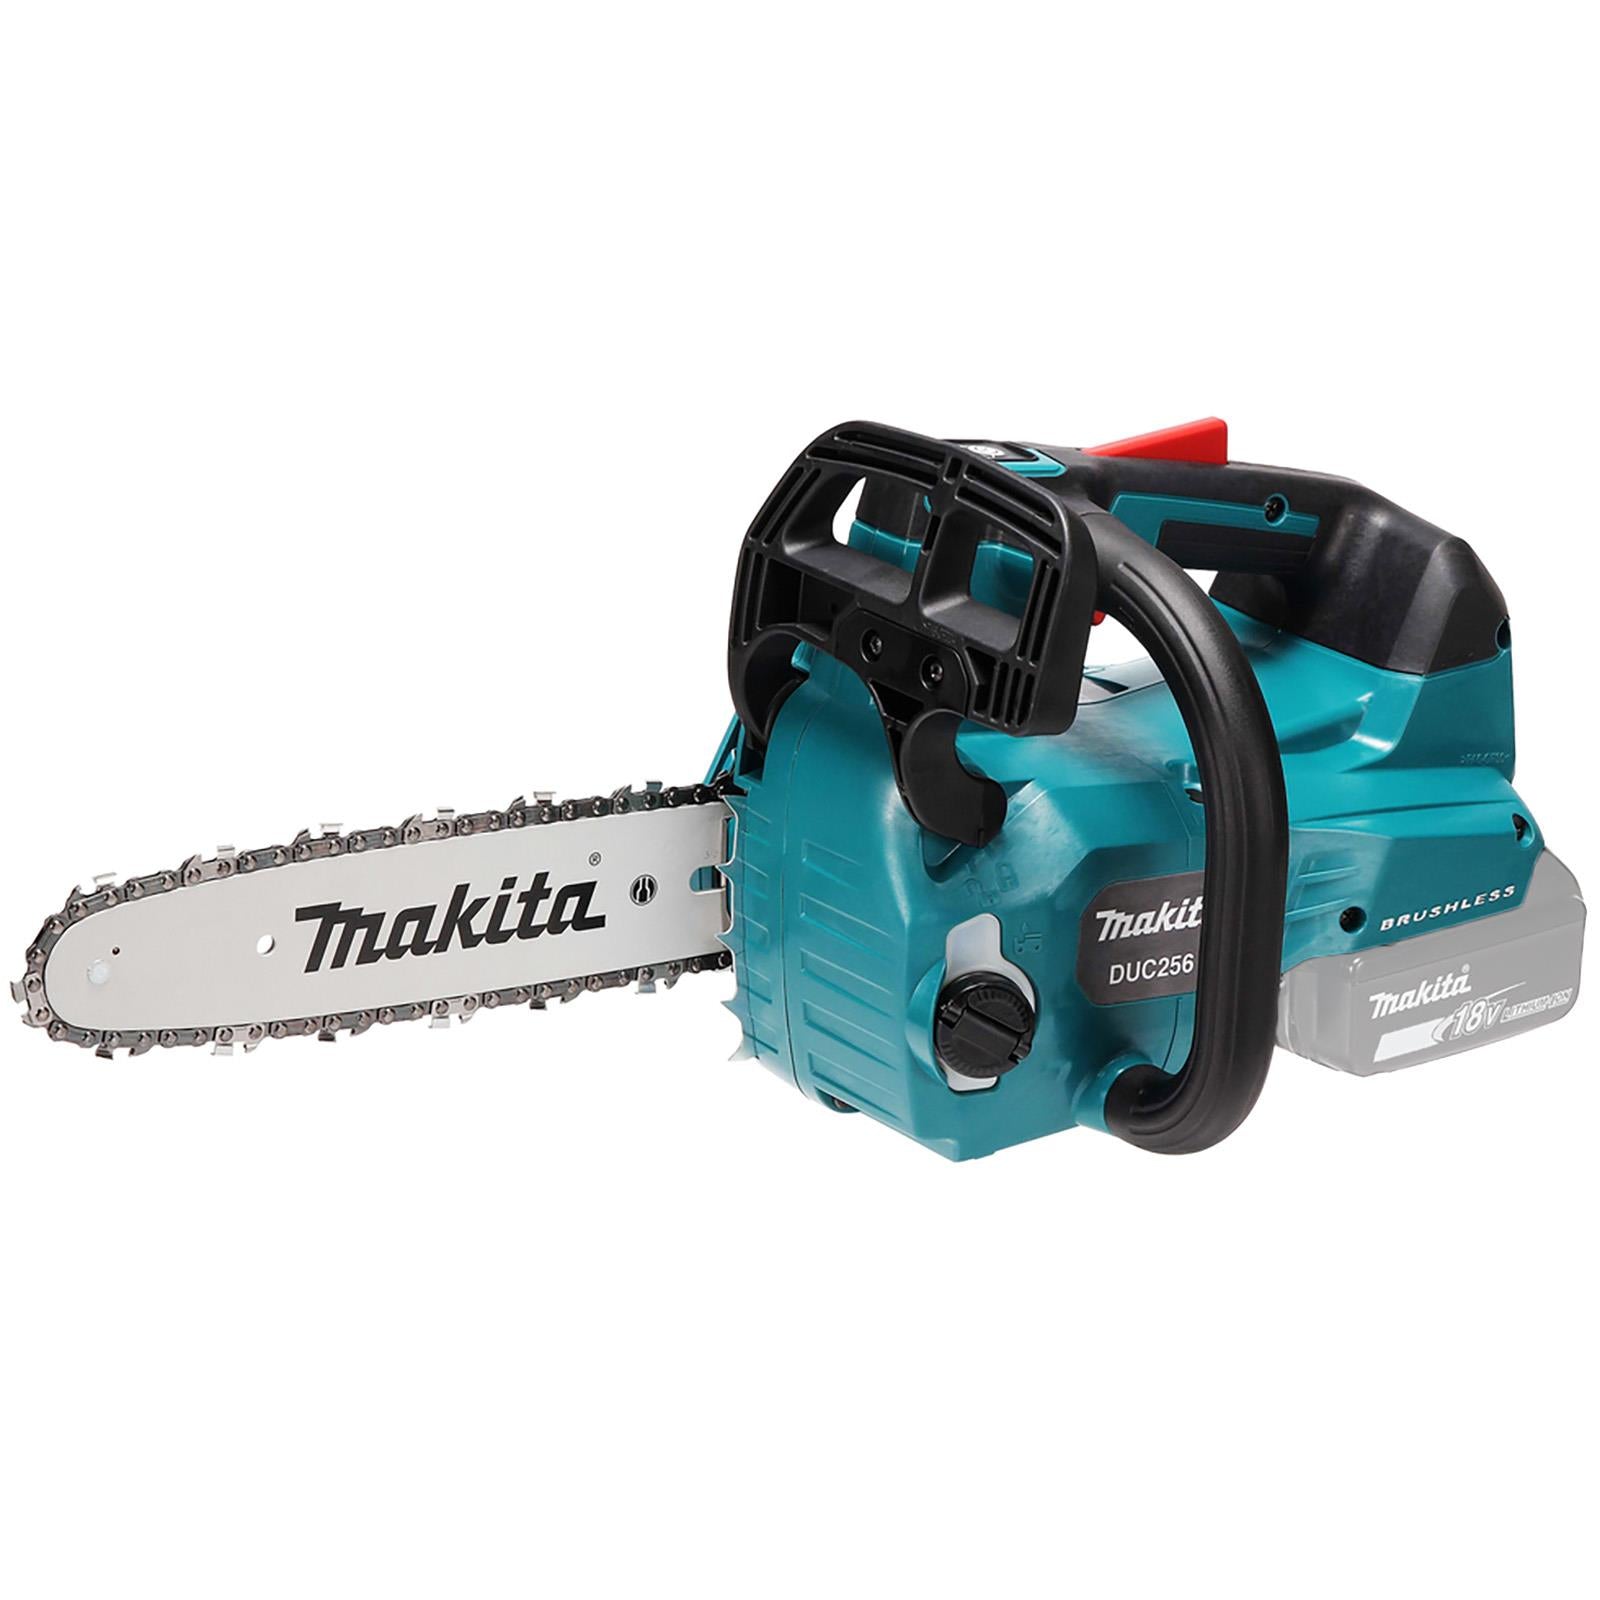 Makita Chainsaw 25cm 10" 18V x 2 LXT Brushless Cordless Top Handle Garden Tree Cutting Pruning Bare Unit Body Only DUC256CZ